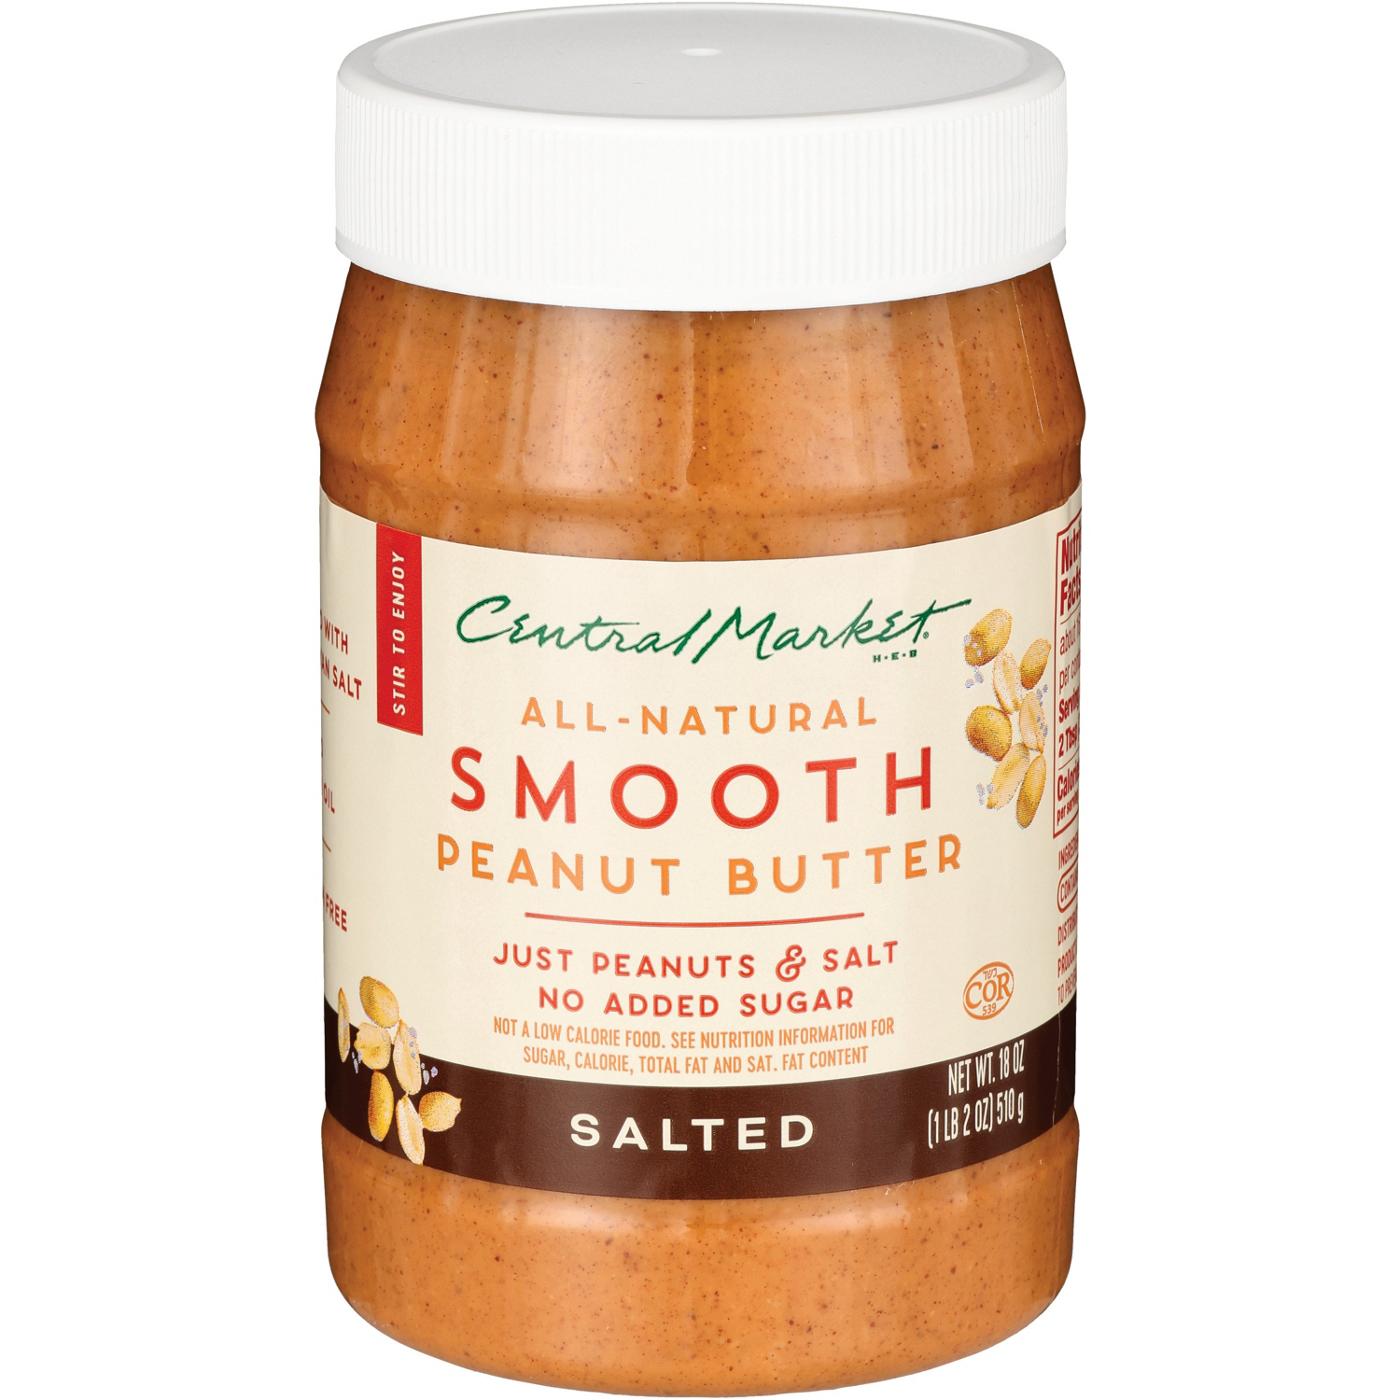 Central Market All-Natural Smooth Peanut Butter - Salted; image 2 of 2